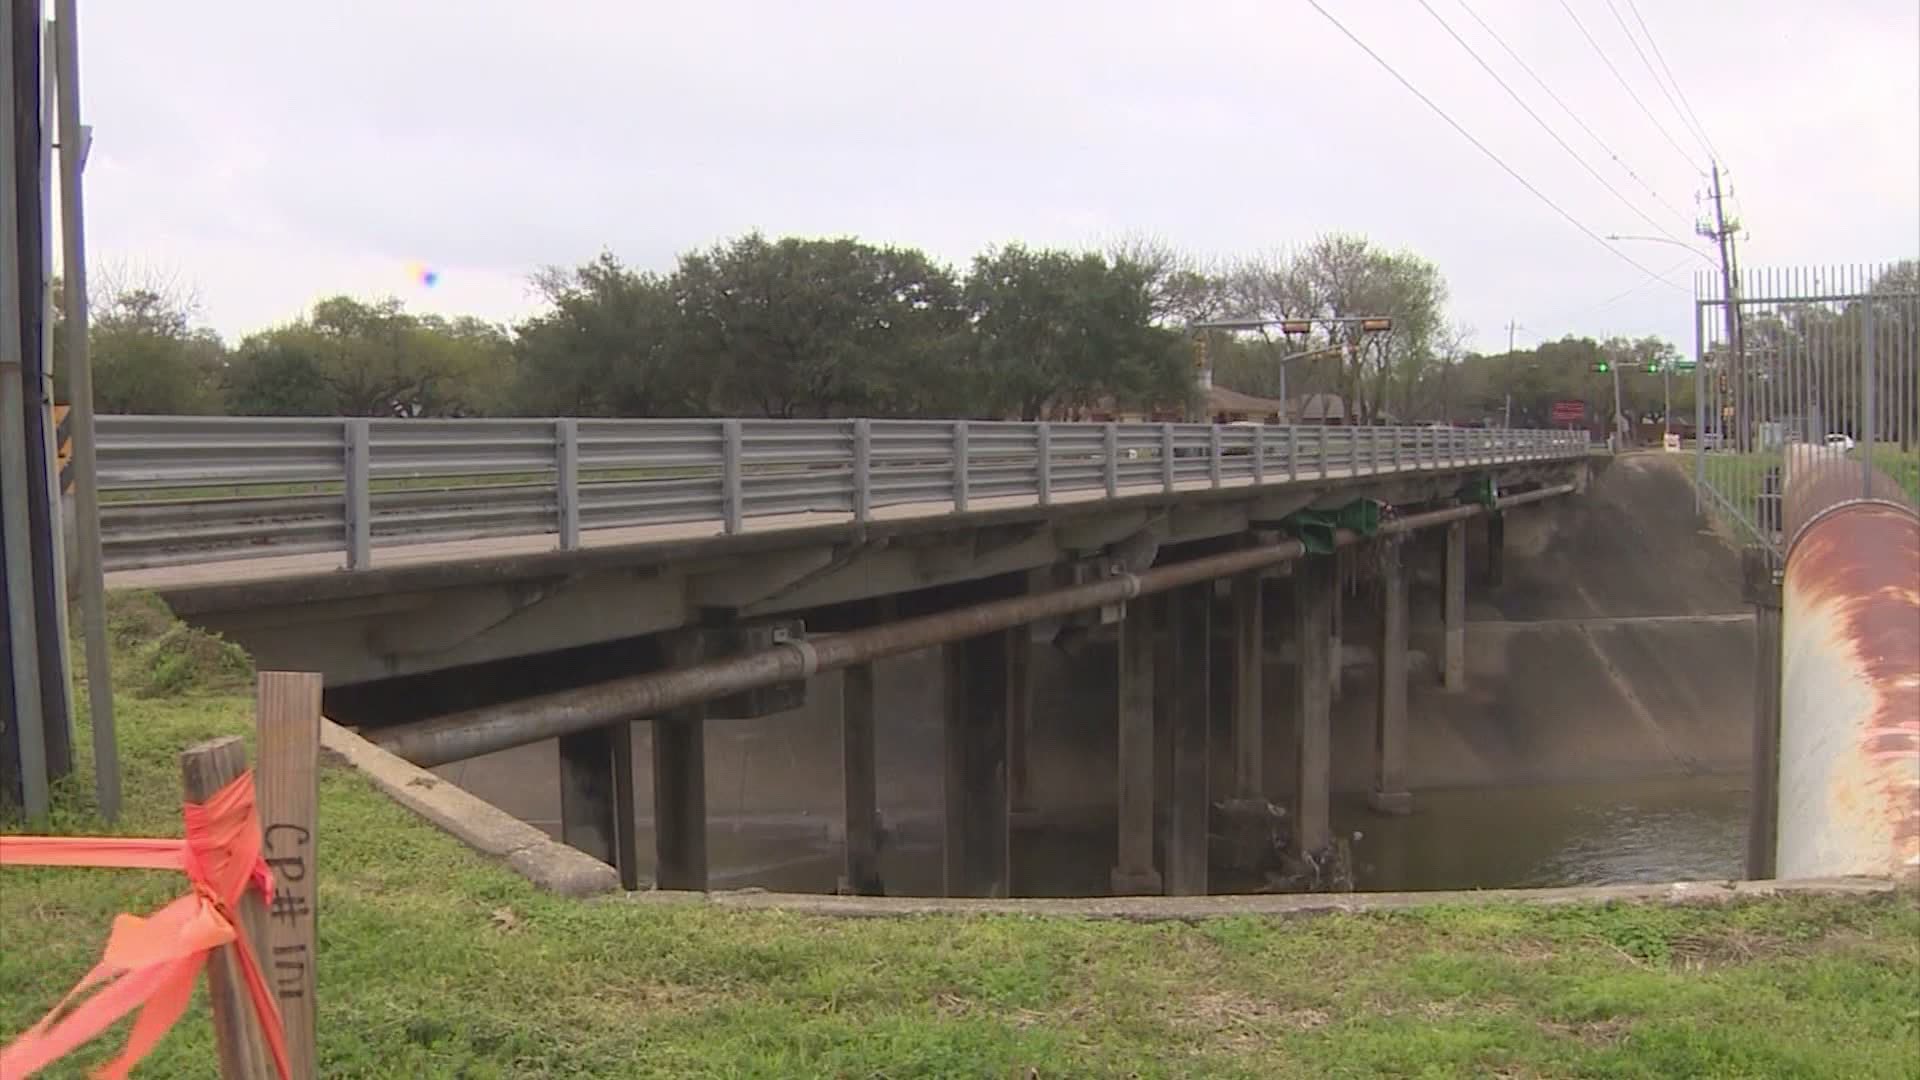 The Texas General Land Office now plans to give Harris County $1.25 billion for flood mitigation and infrastructure improvements.